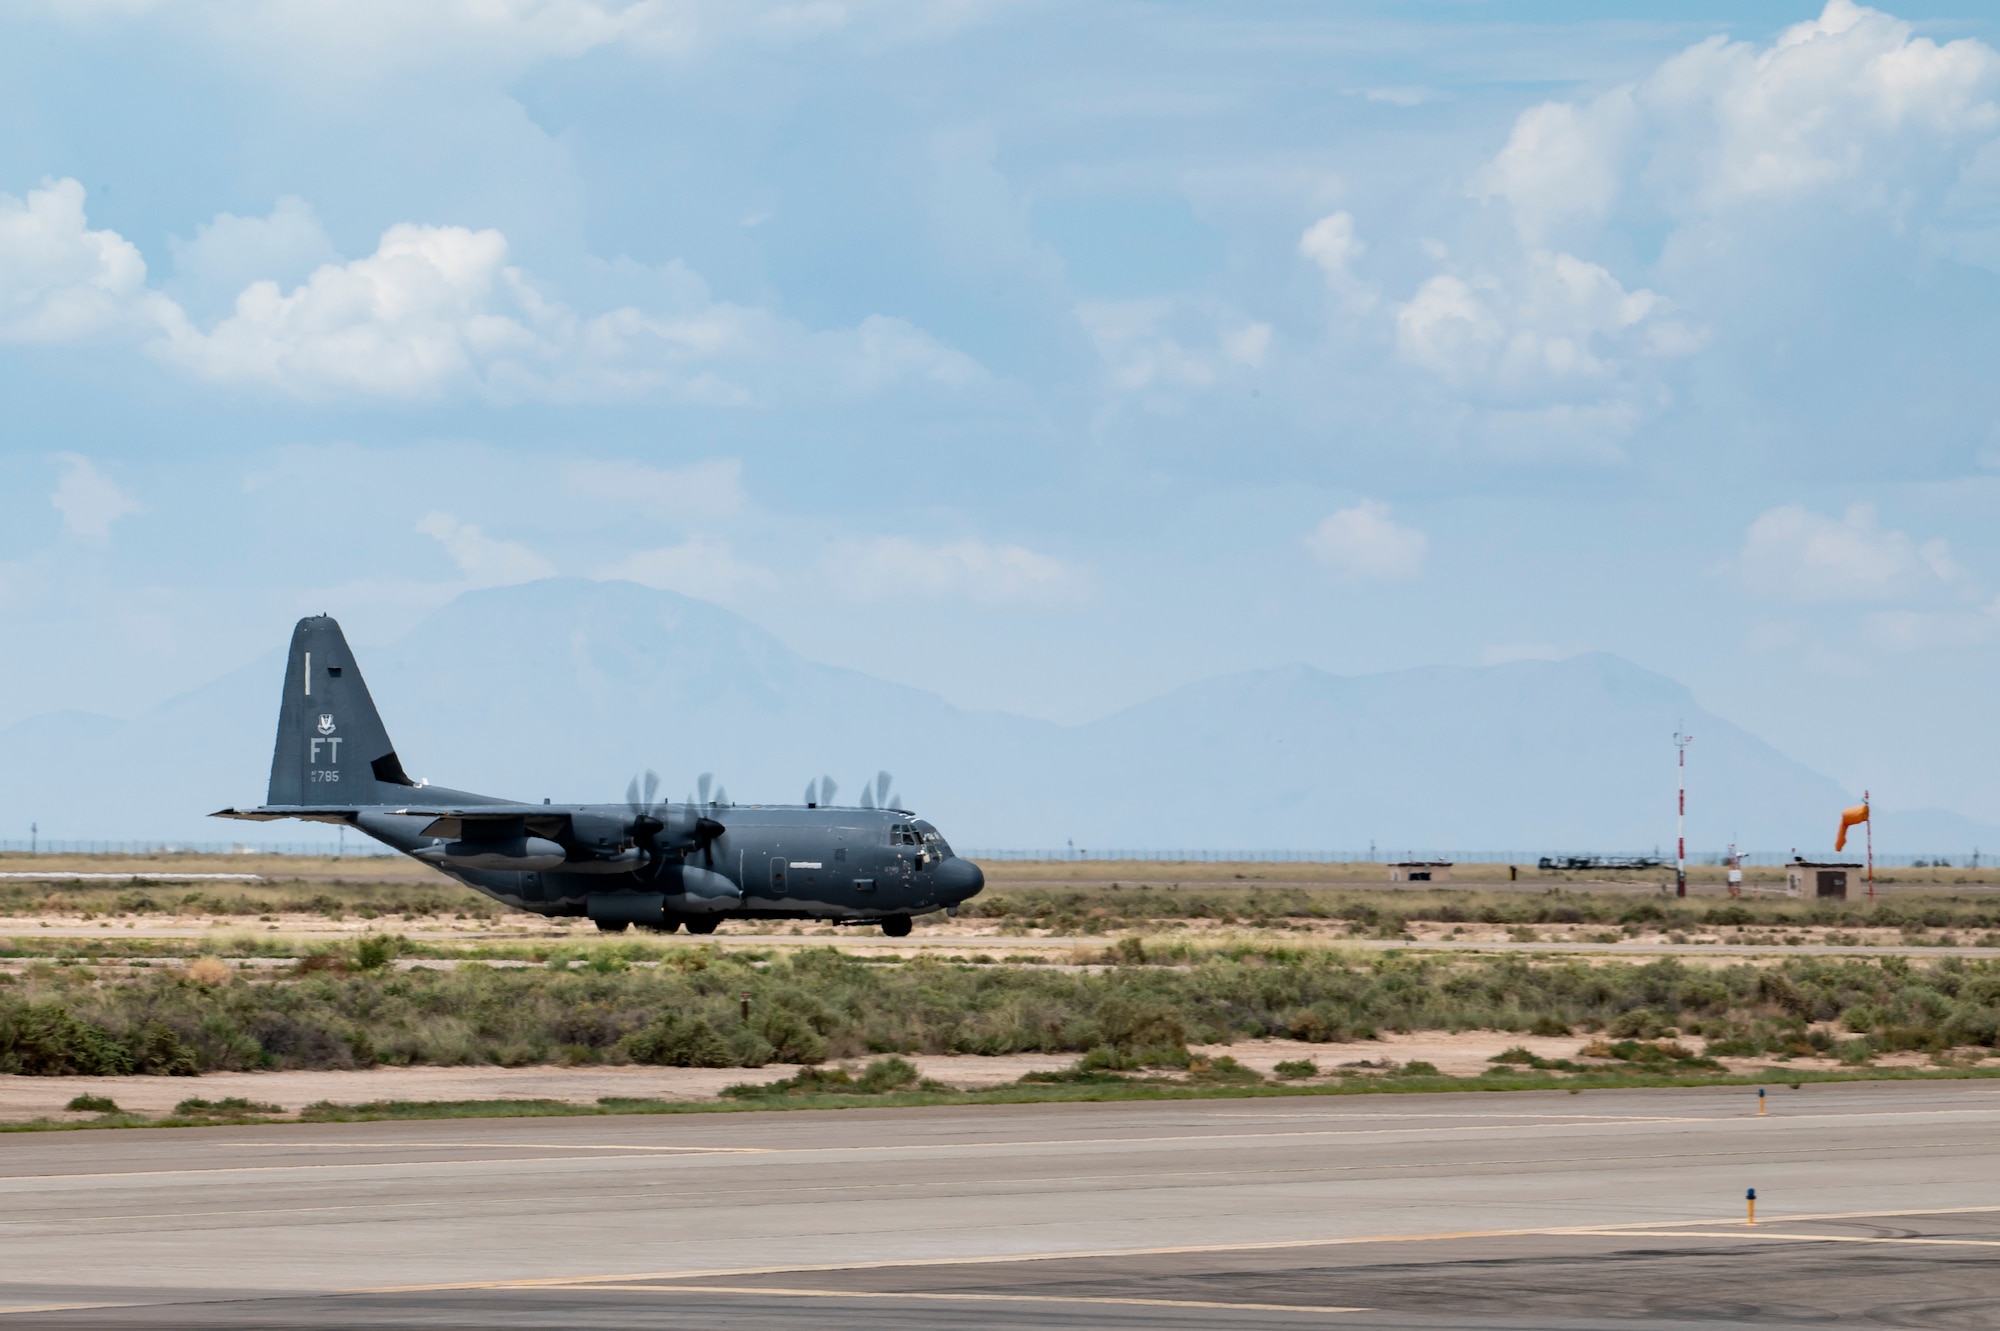 U.S. Air Force aircrew from the 71st Rescue Squadron, Moody Air Force Base, Georgia, arrive at Holloman Air Force Base, New Mexico, with members of the 822nd Base Defense Squadron, Aug. 29, 2021. The 822nd BDS were tasked to provide an enhanced security presence at Holloman AFB in support of Task Force – Holloman. The Department of Defense, through U.S. Northern Command, and in support of the Department of Homeland Security, is providing transportation, temporary housing, medical screening, and general support for at least 50,000 Afghan evacuees at suitable facilities, in permanent or temporary structures, as quickly as possible. This initiative provides Afghan personnel essential support at secure locations outside Afghanistan. (U.S. Air Force photo by Staff Sgt. Devin Boyer)